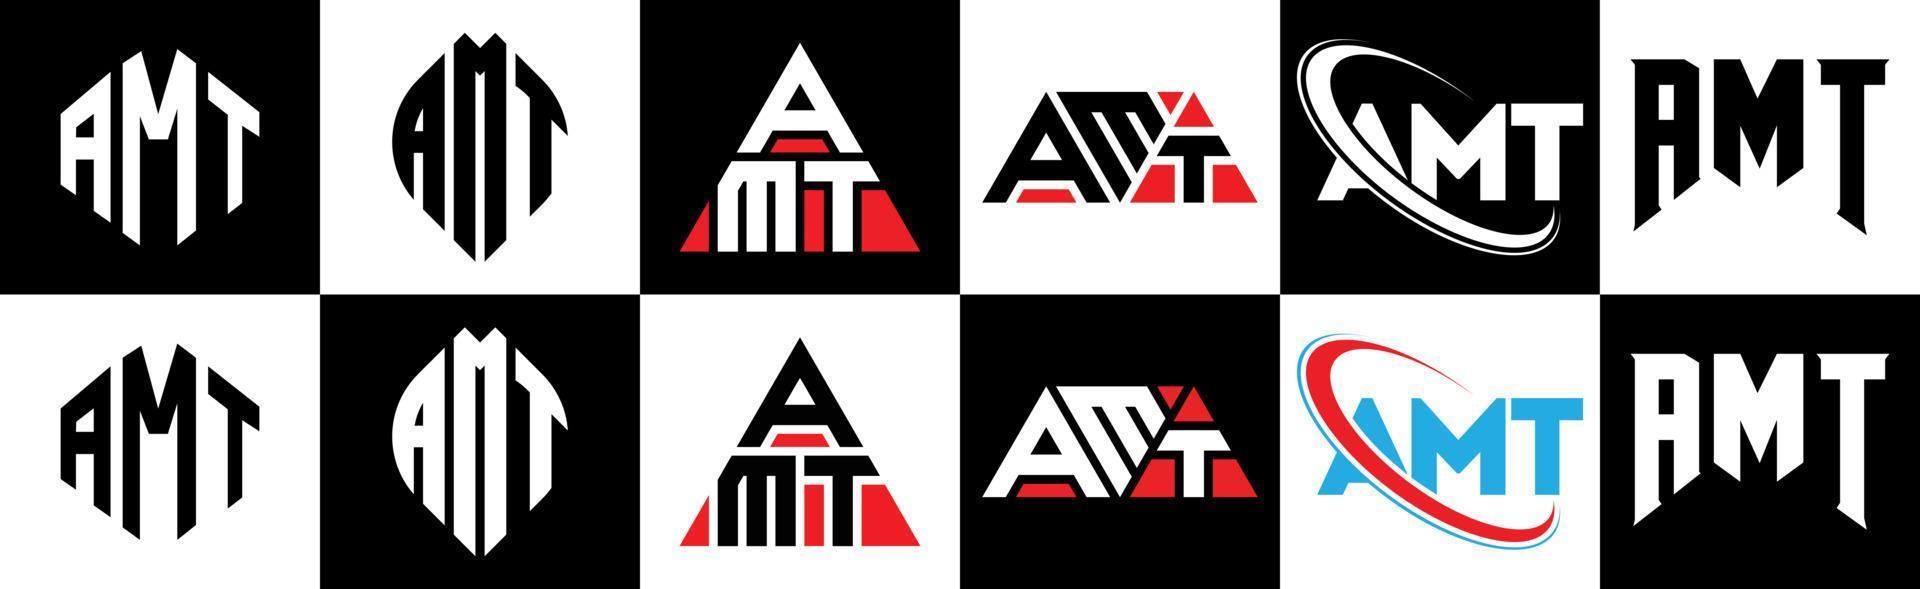 AMT letter logo design in six style. AMT polygon, circle, triangle, hexagon, flat and simple style with black and white color variation letter logo set in one artboard. AMT minimalist and classic logo vector